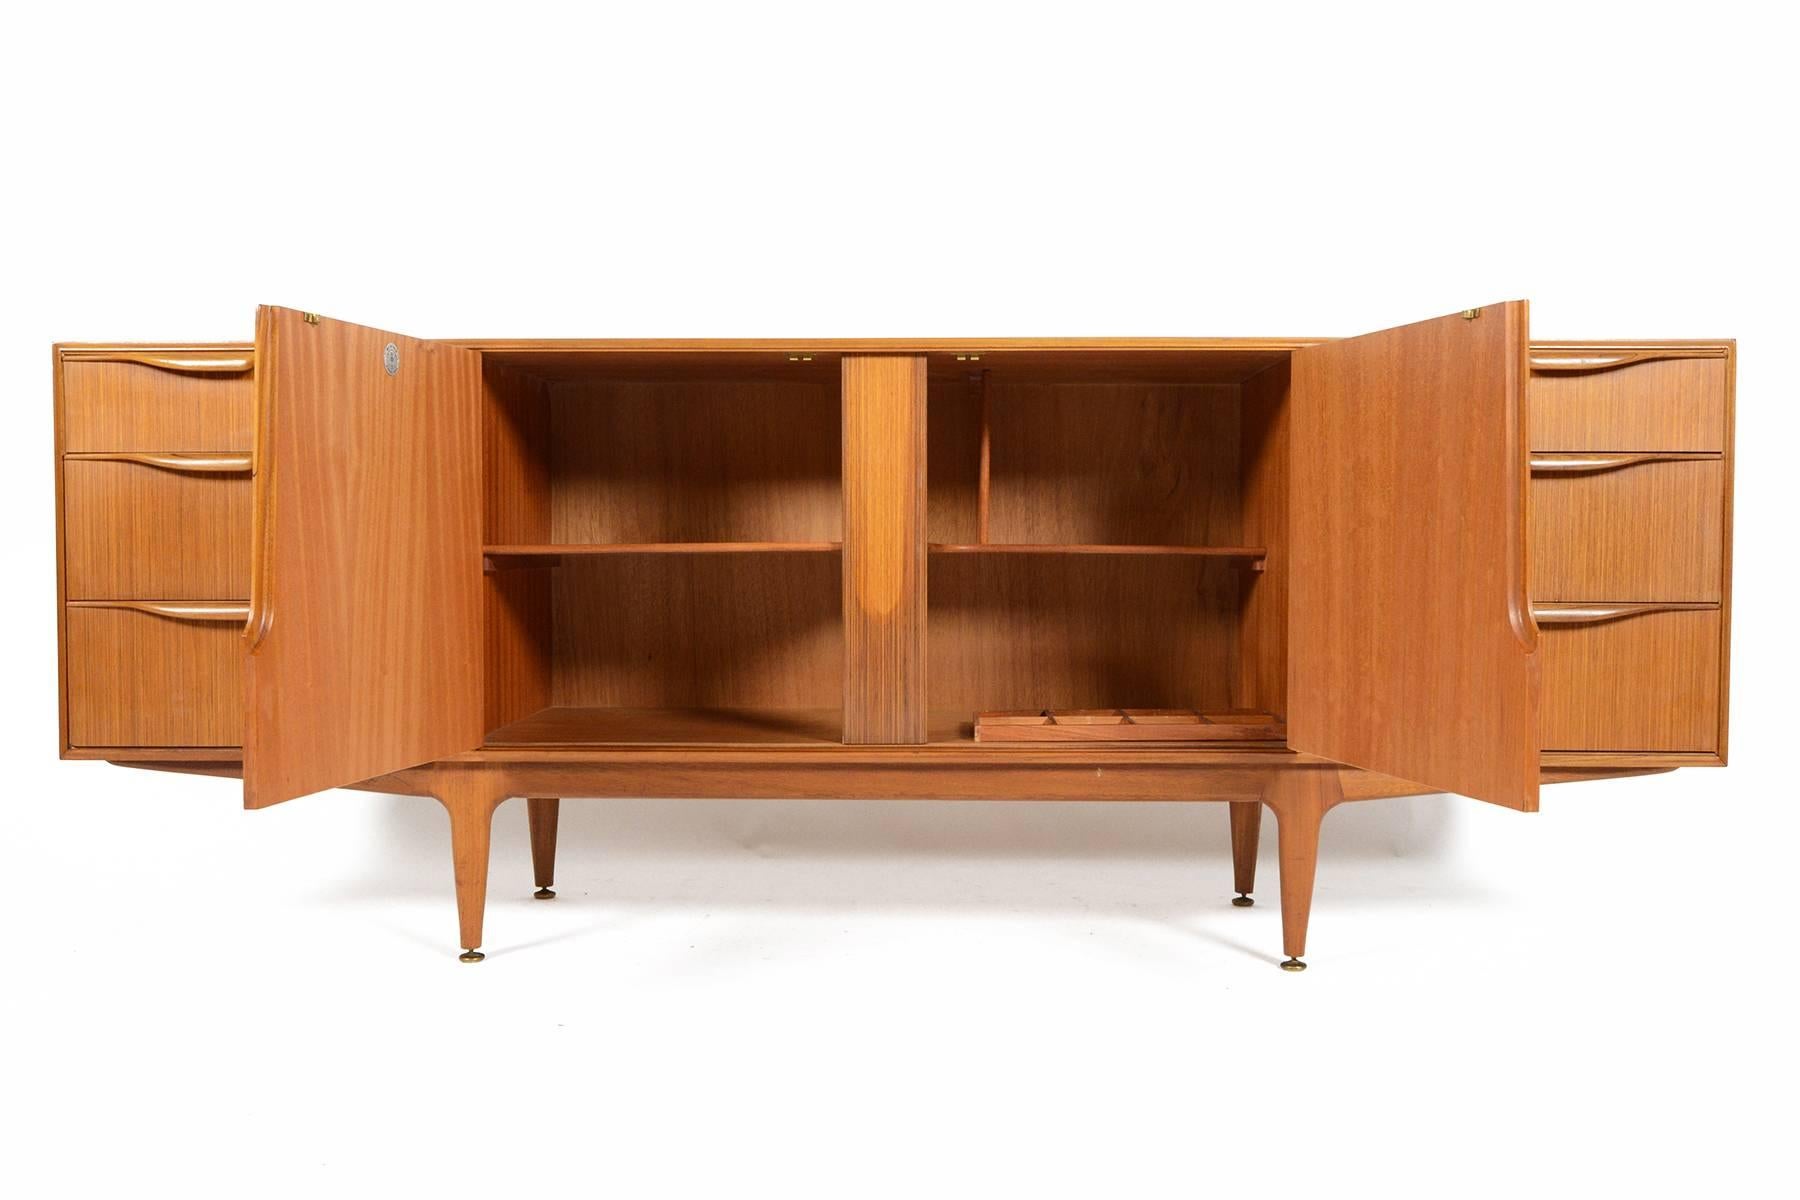 This large, low line teak credenza was designed and manufactured by A.H. McIntosh in the 1960s. Featuring carved teak drawer pulls and a sculptural teak base, this magnificent piece will look amazing in any modern home. Right interior even offers